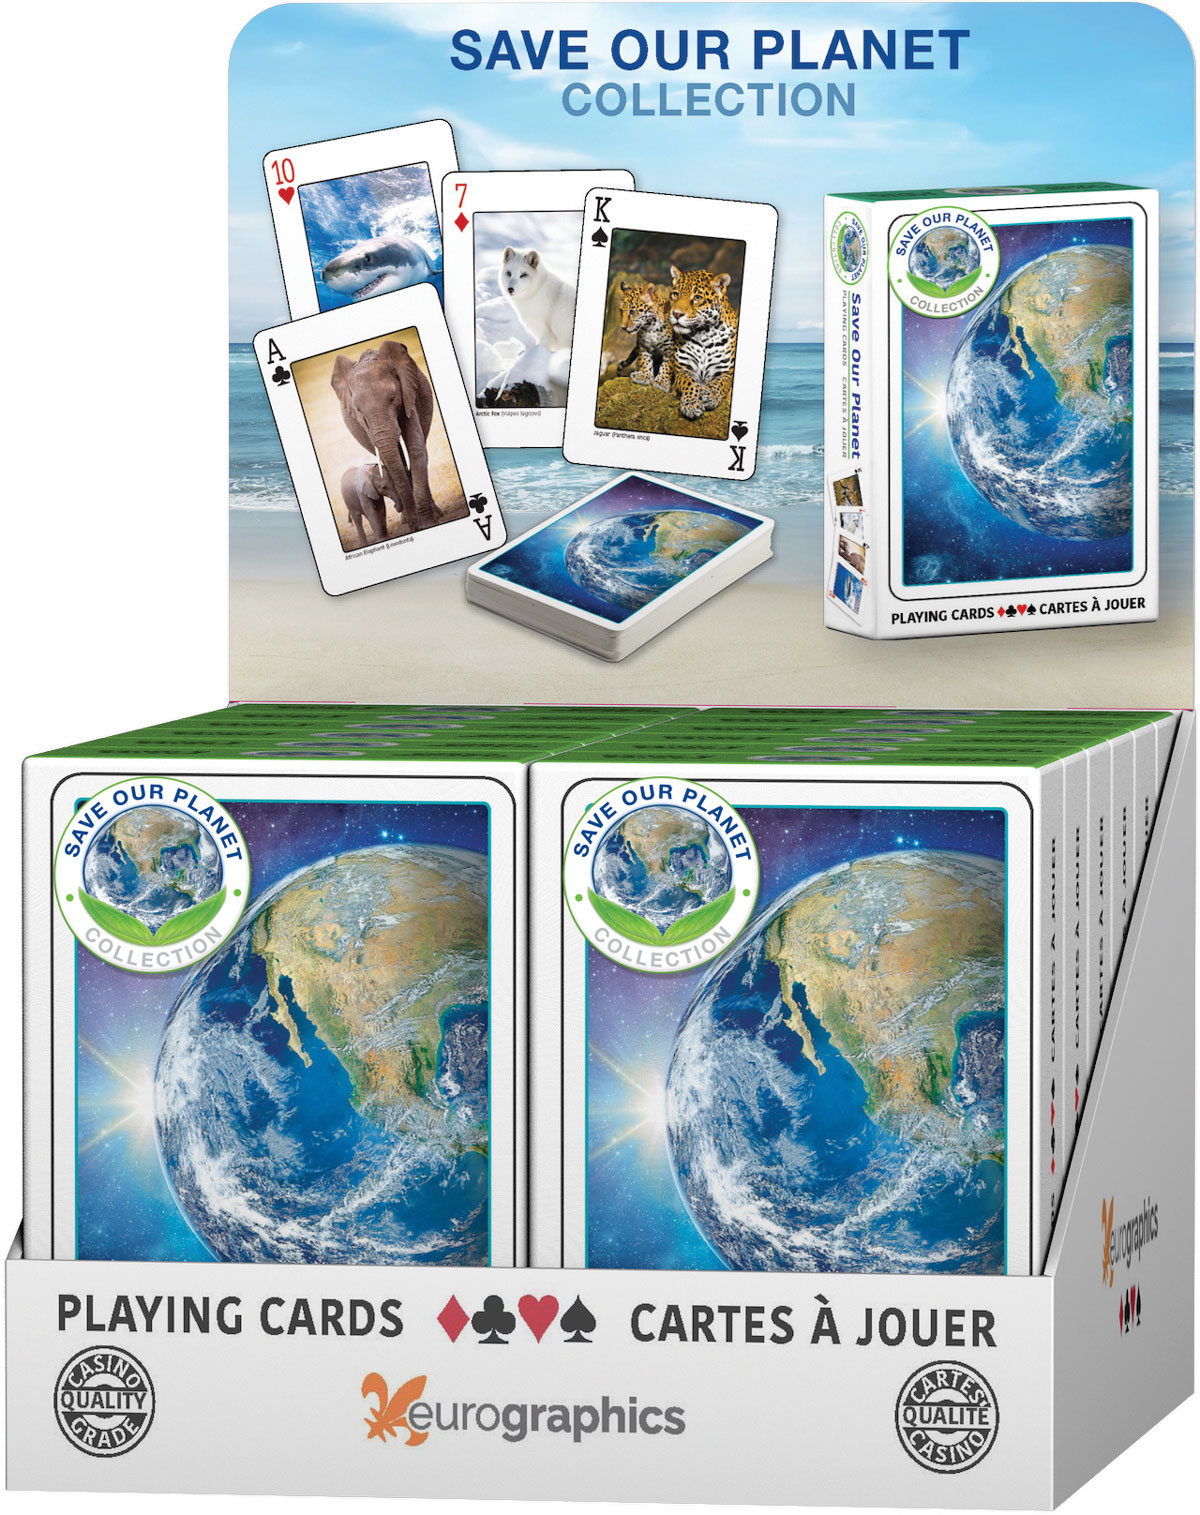 Save Our Planet (12 decks in a PDQ display) at Eurographics